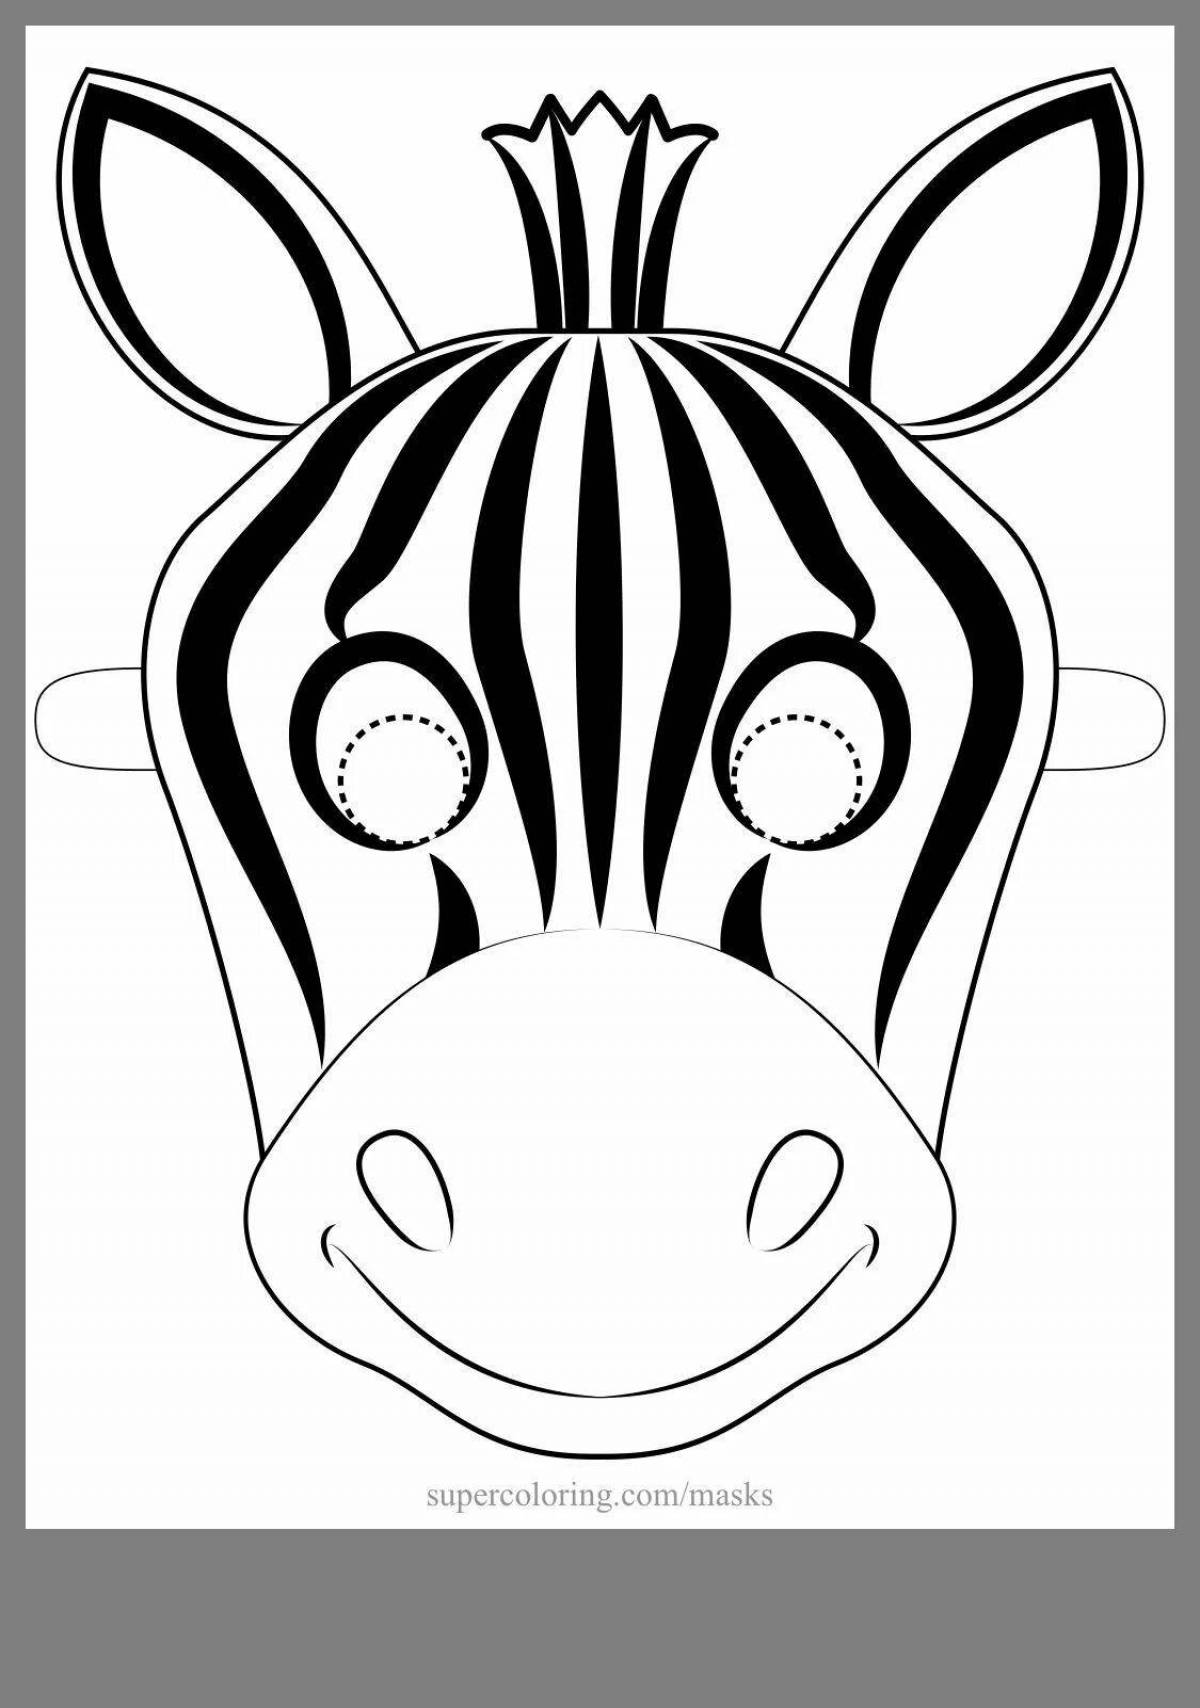 Colorful animal head mask coloring book for kids